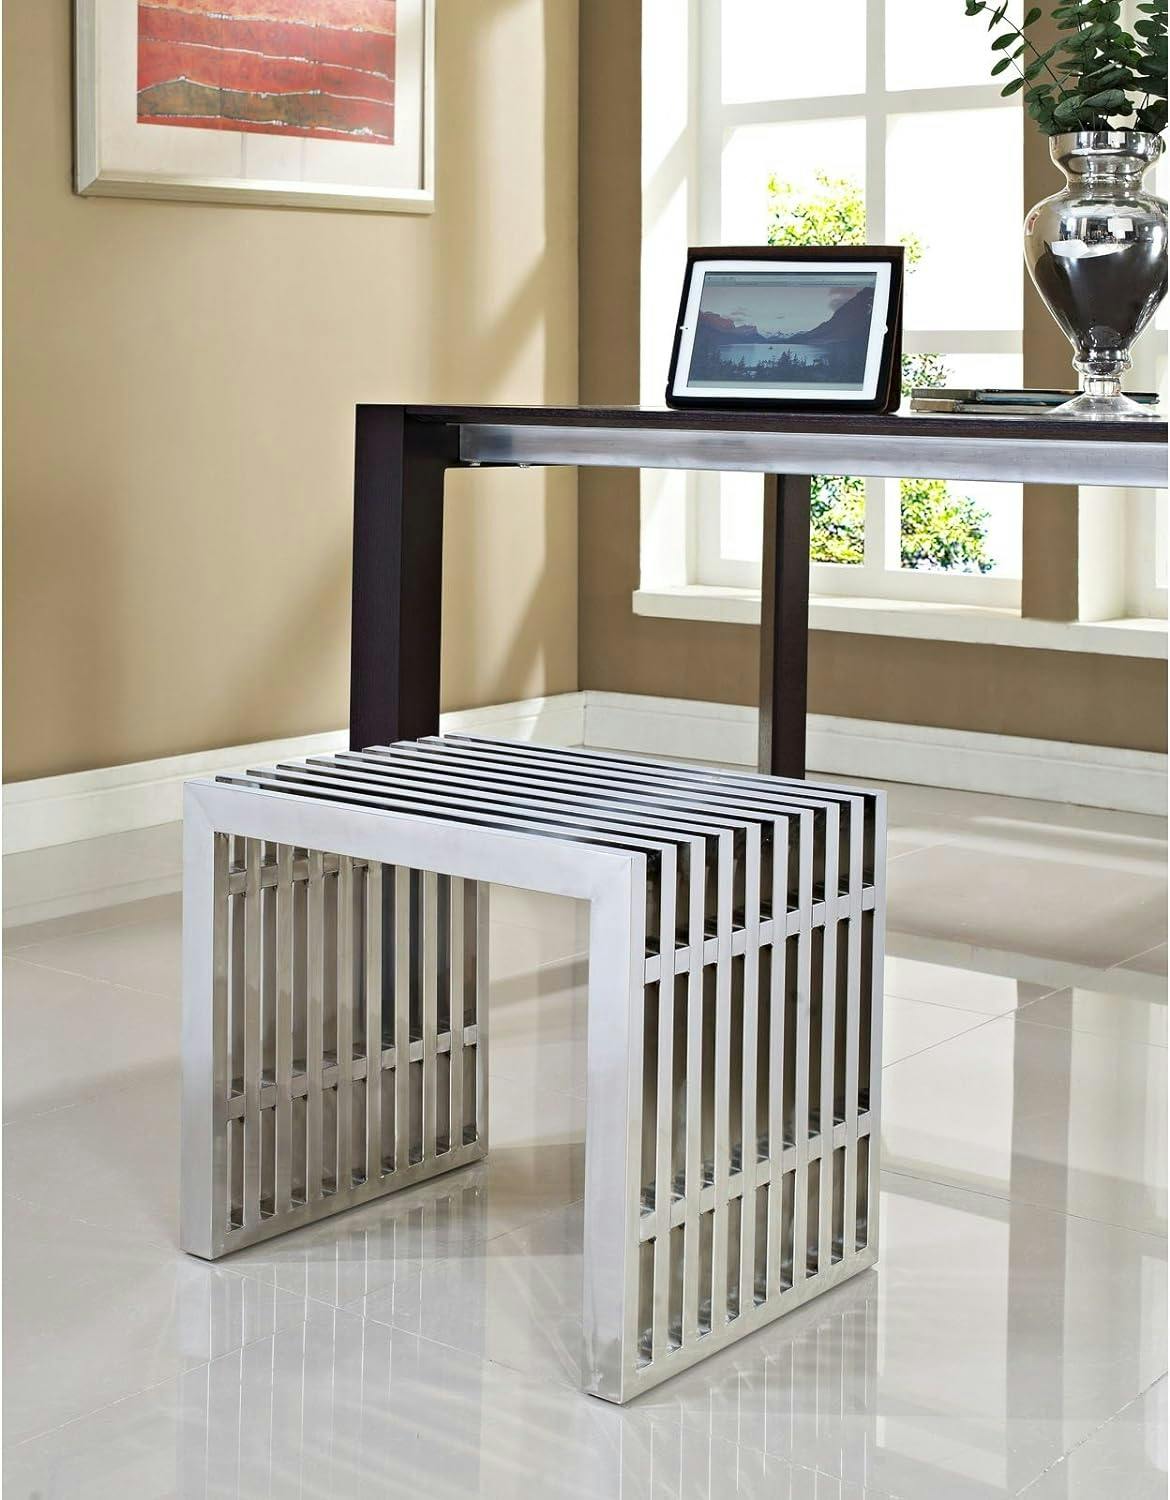 Gridiron Small Silver Stainless Steel Multi-Purpose Bench with Storage